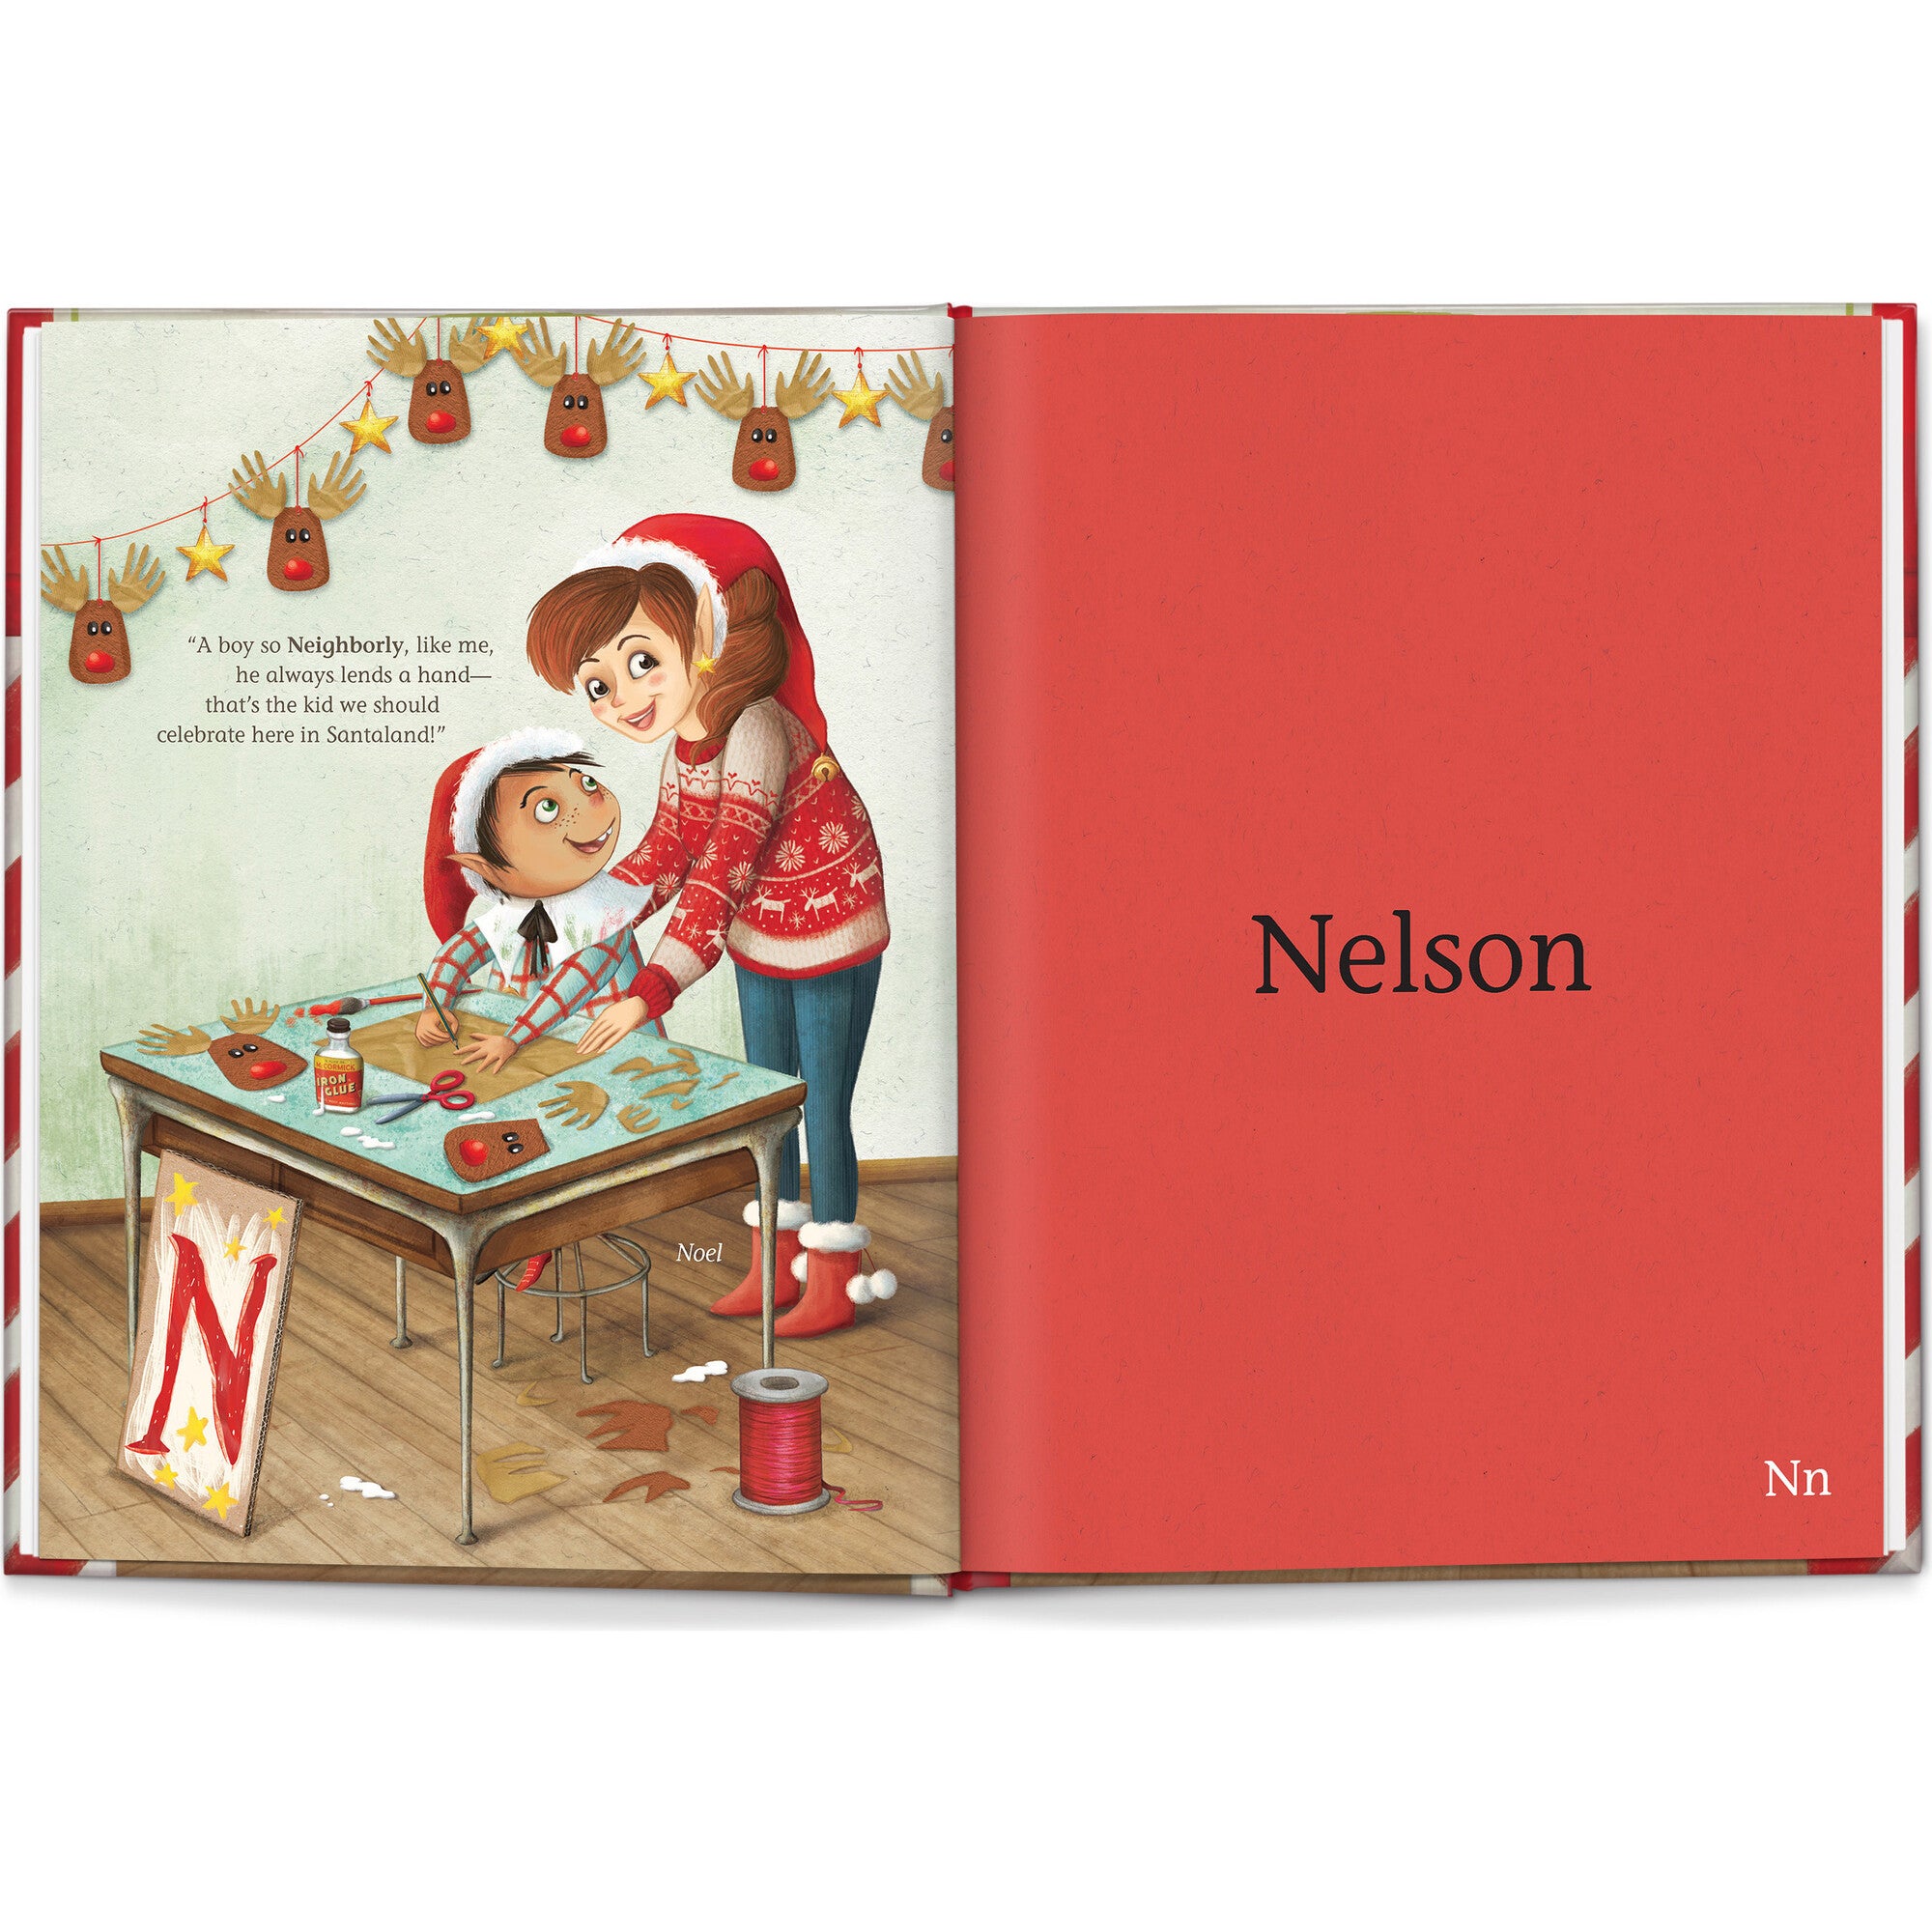 I See Me! My Very Own Christmas Personalized Book, 24 Piece Puzzle and Card Game Gift Set 